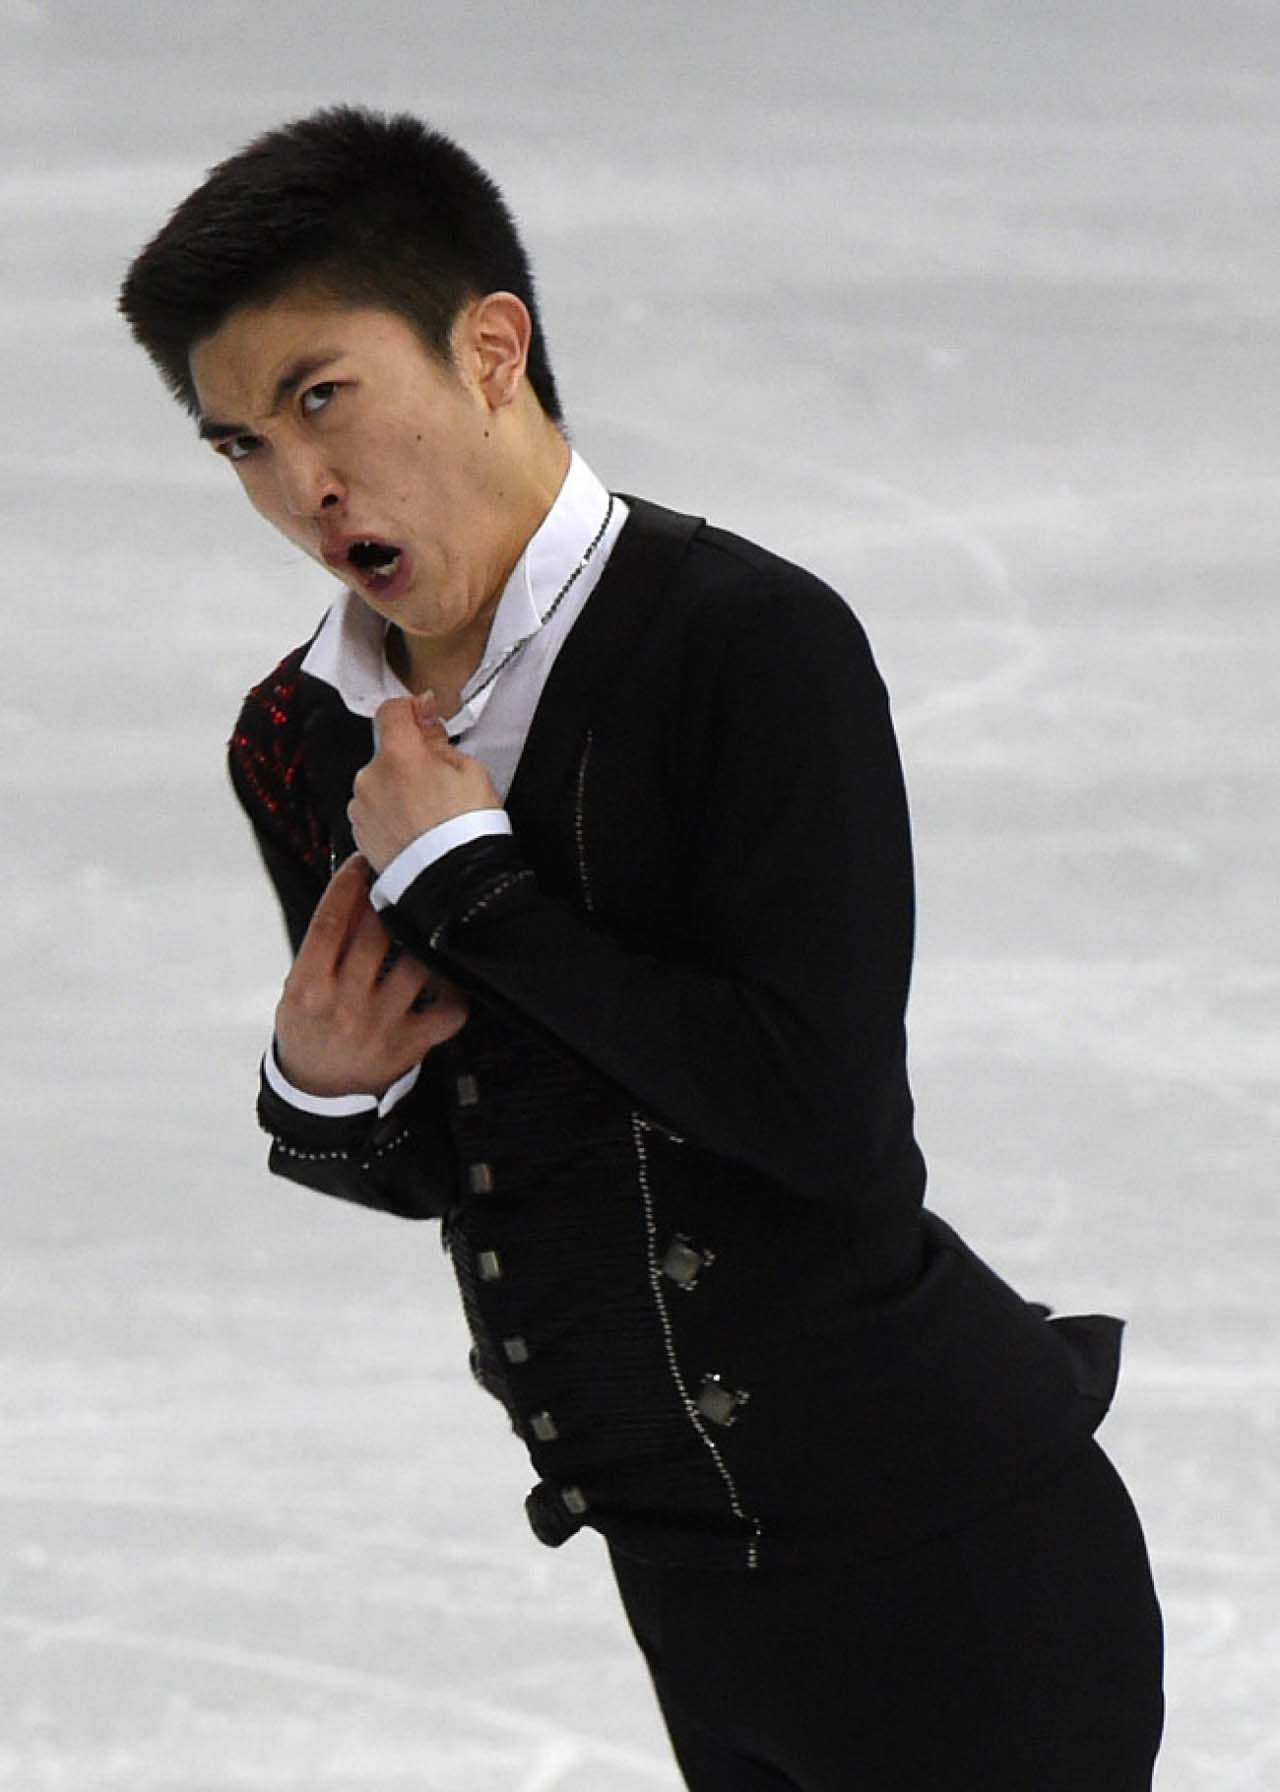 20 Hilarious Mid-Performance Faces Of Olympic Figure Skaters